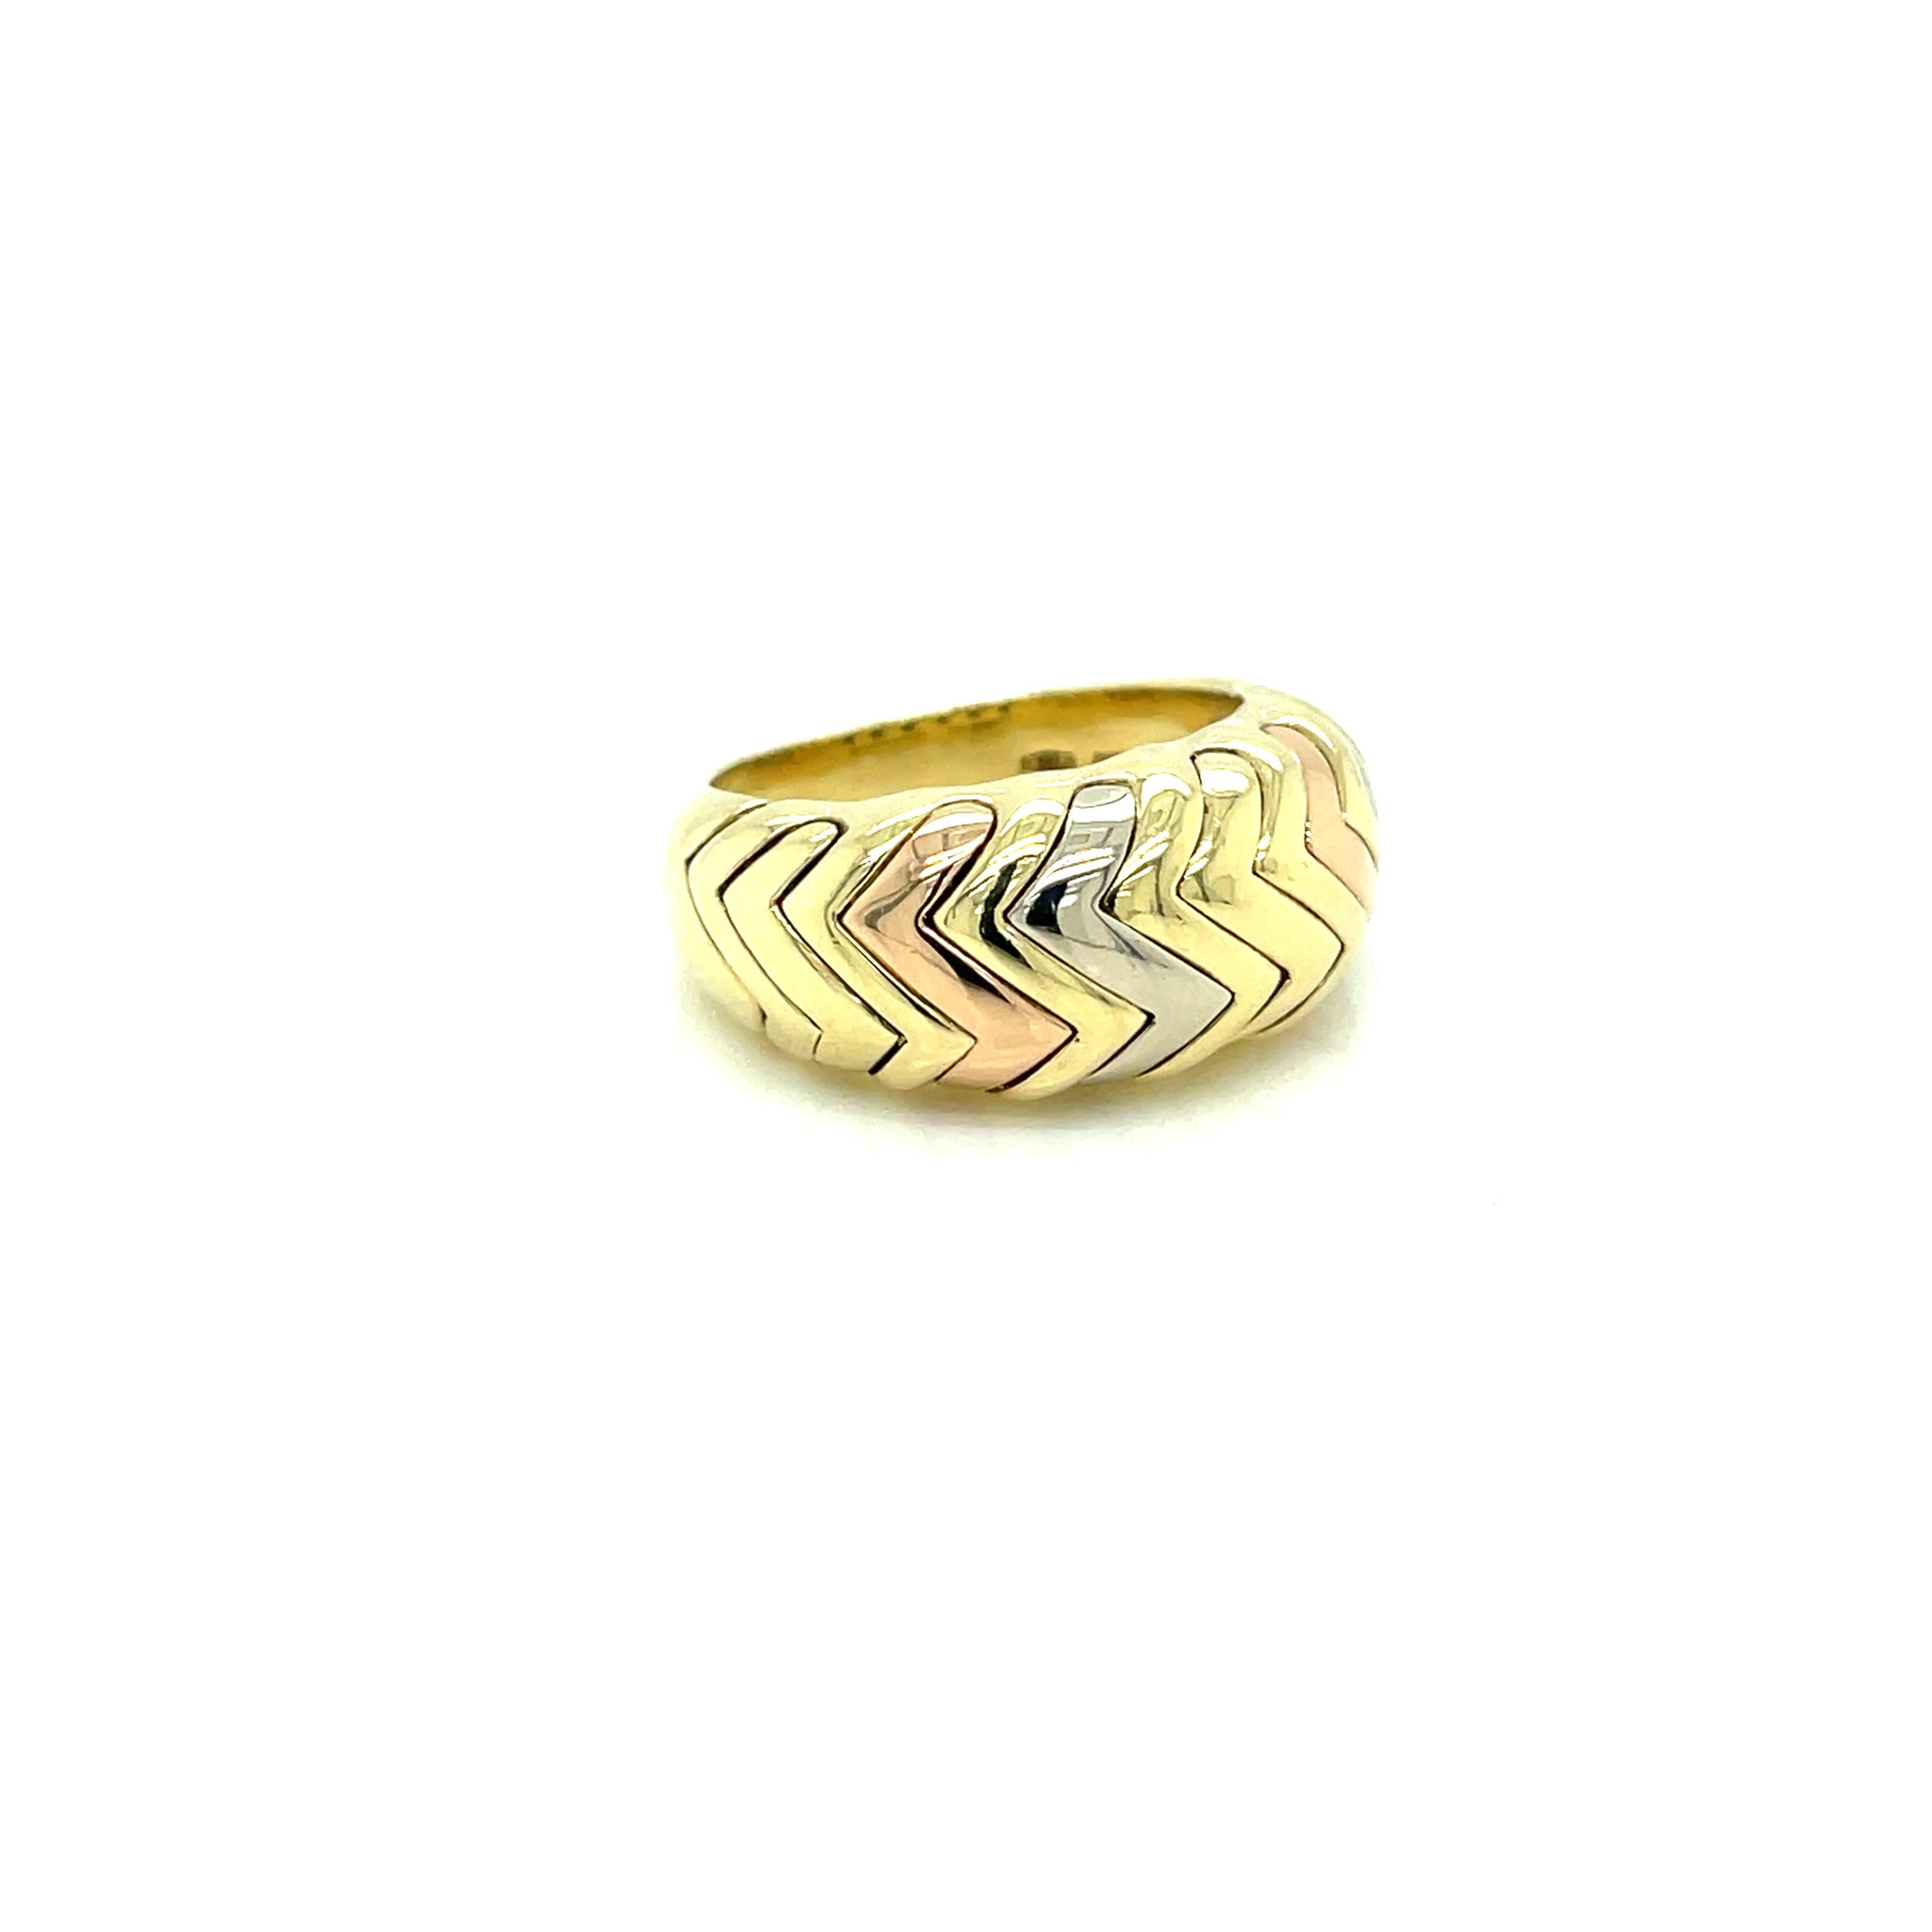 Iconic ring in 18kt yellow, white and rose gold. Signed Bulgari, from the “Spiga” collection, Made in Italy, circa 1980. Excellent condition 10/10,
Gross Weight: 10,4 grams
Size: US 6 - 52

Stamped, with the maker's mark, the Italian gold assay